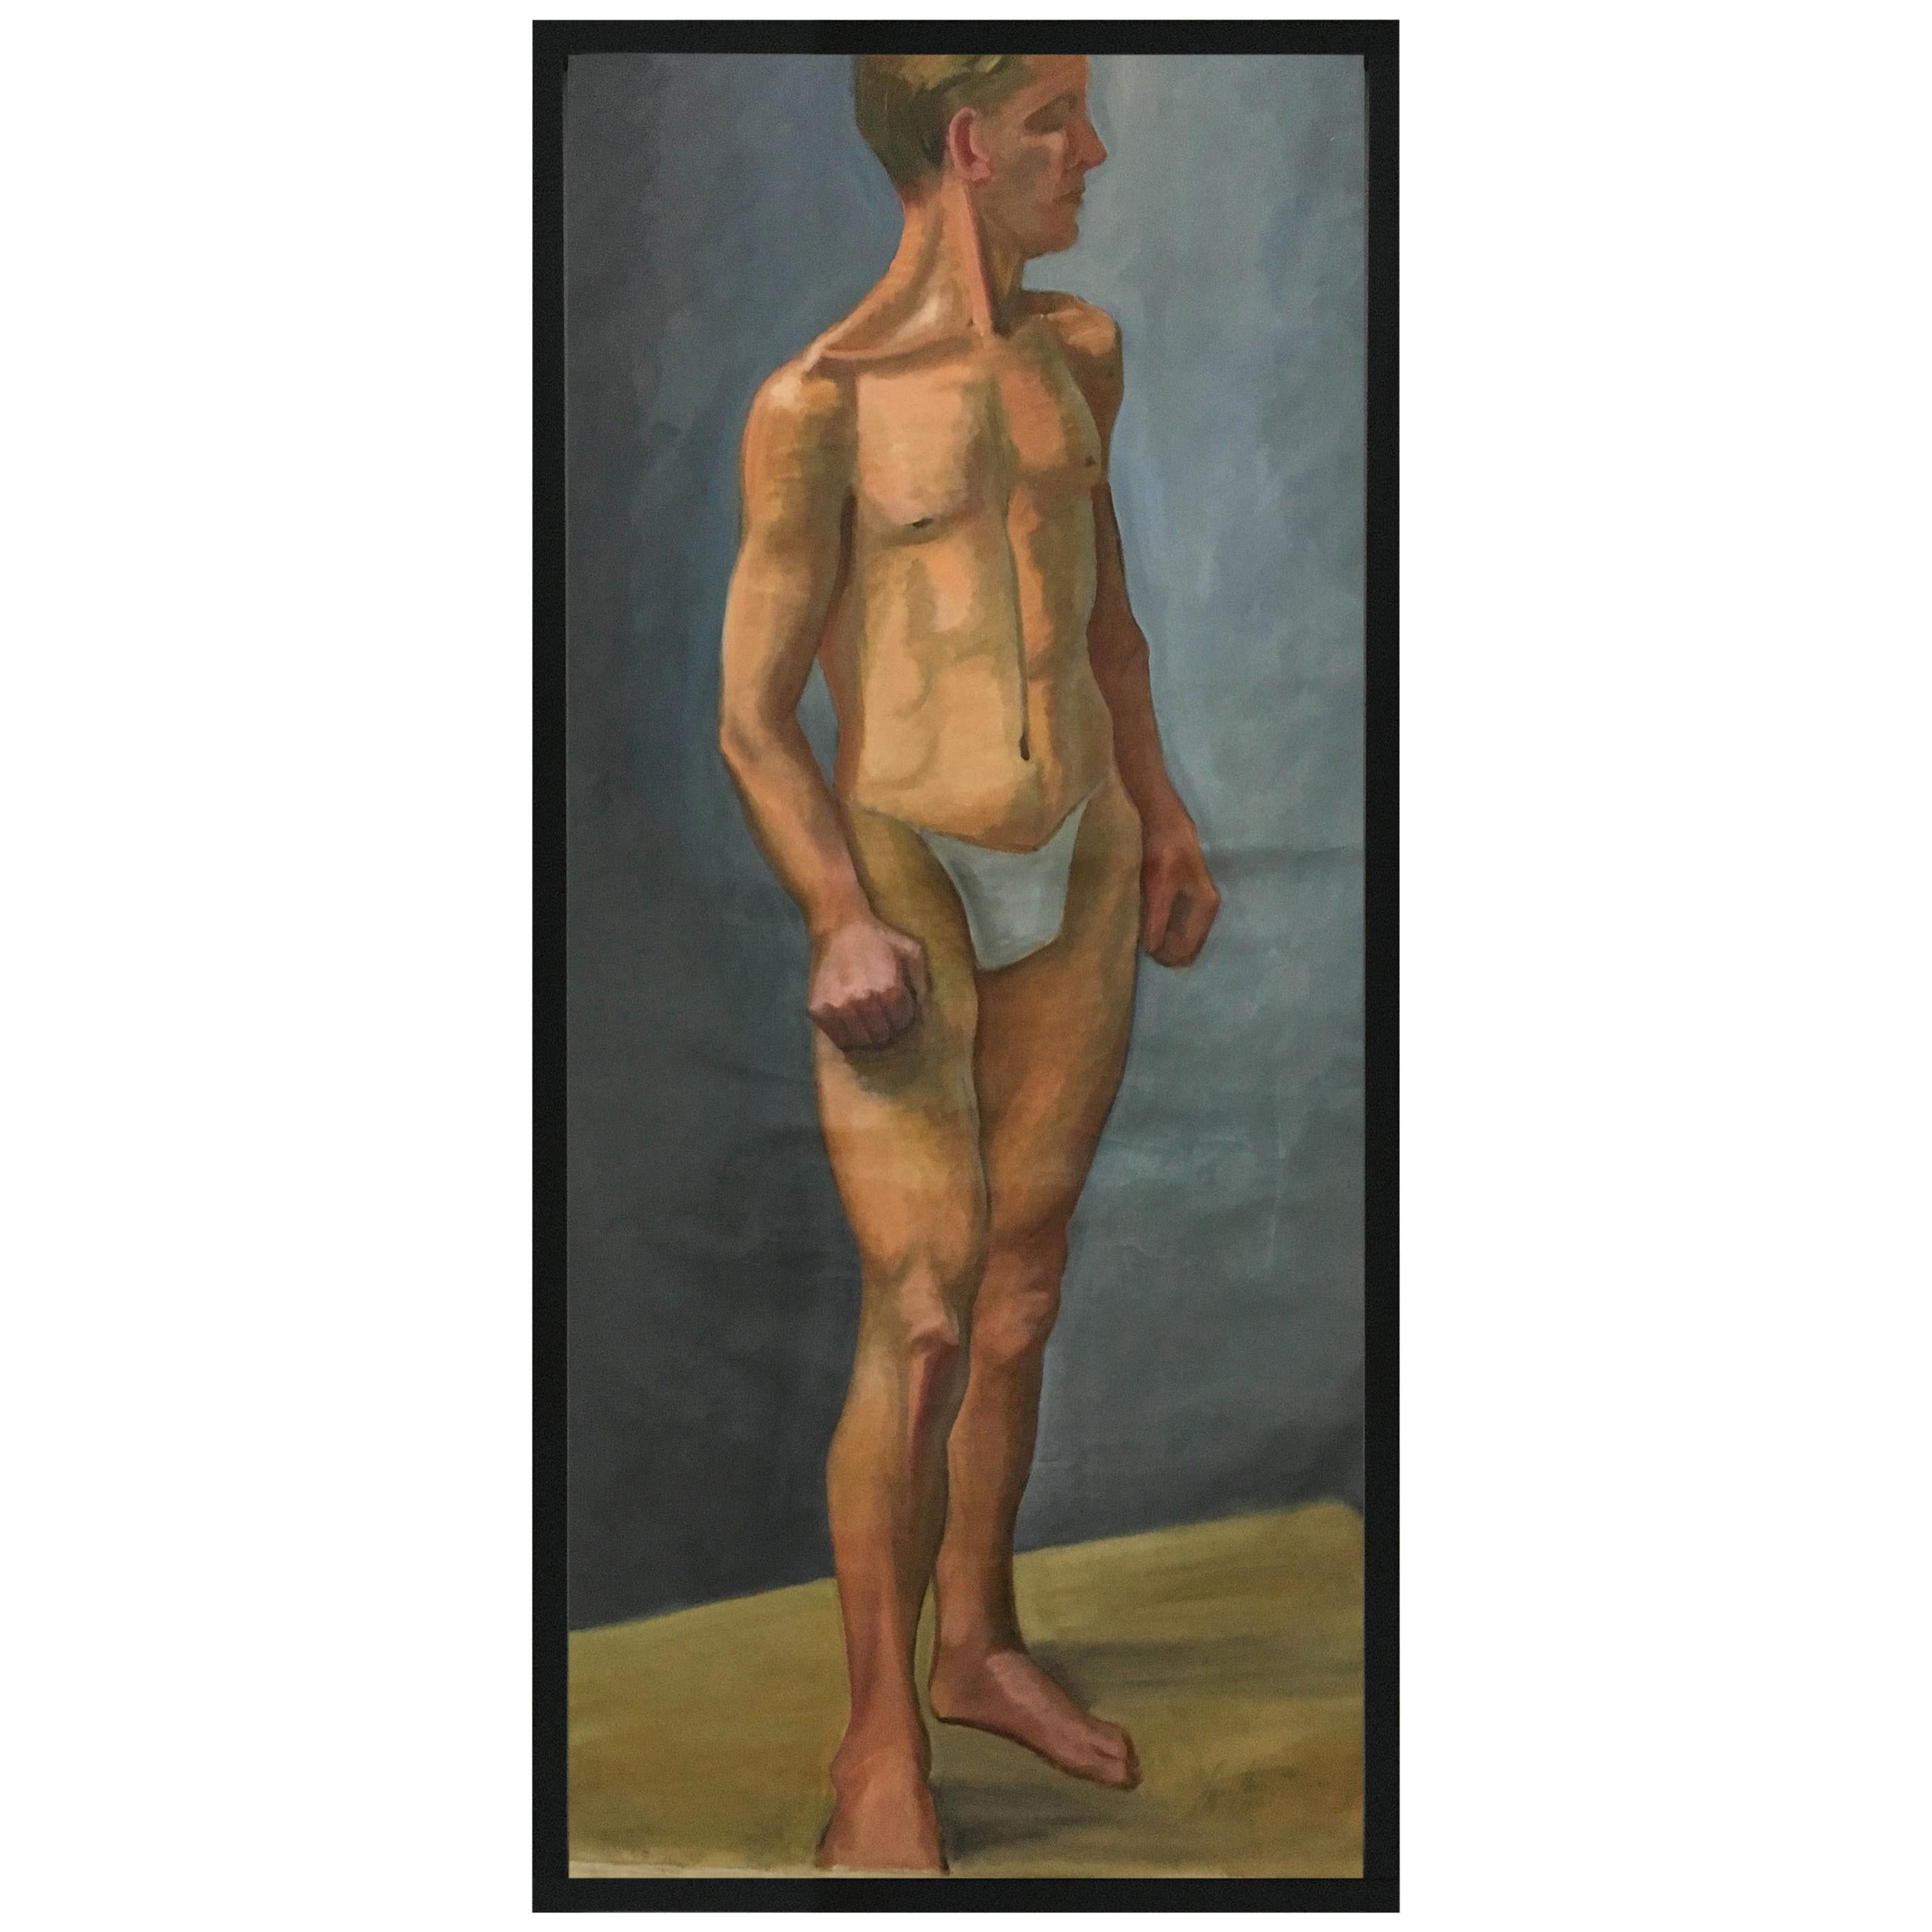 1933 Male 'White' Men Nude Portrait Study Oil Painting by Olga von Mossig-Zupan For Sale